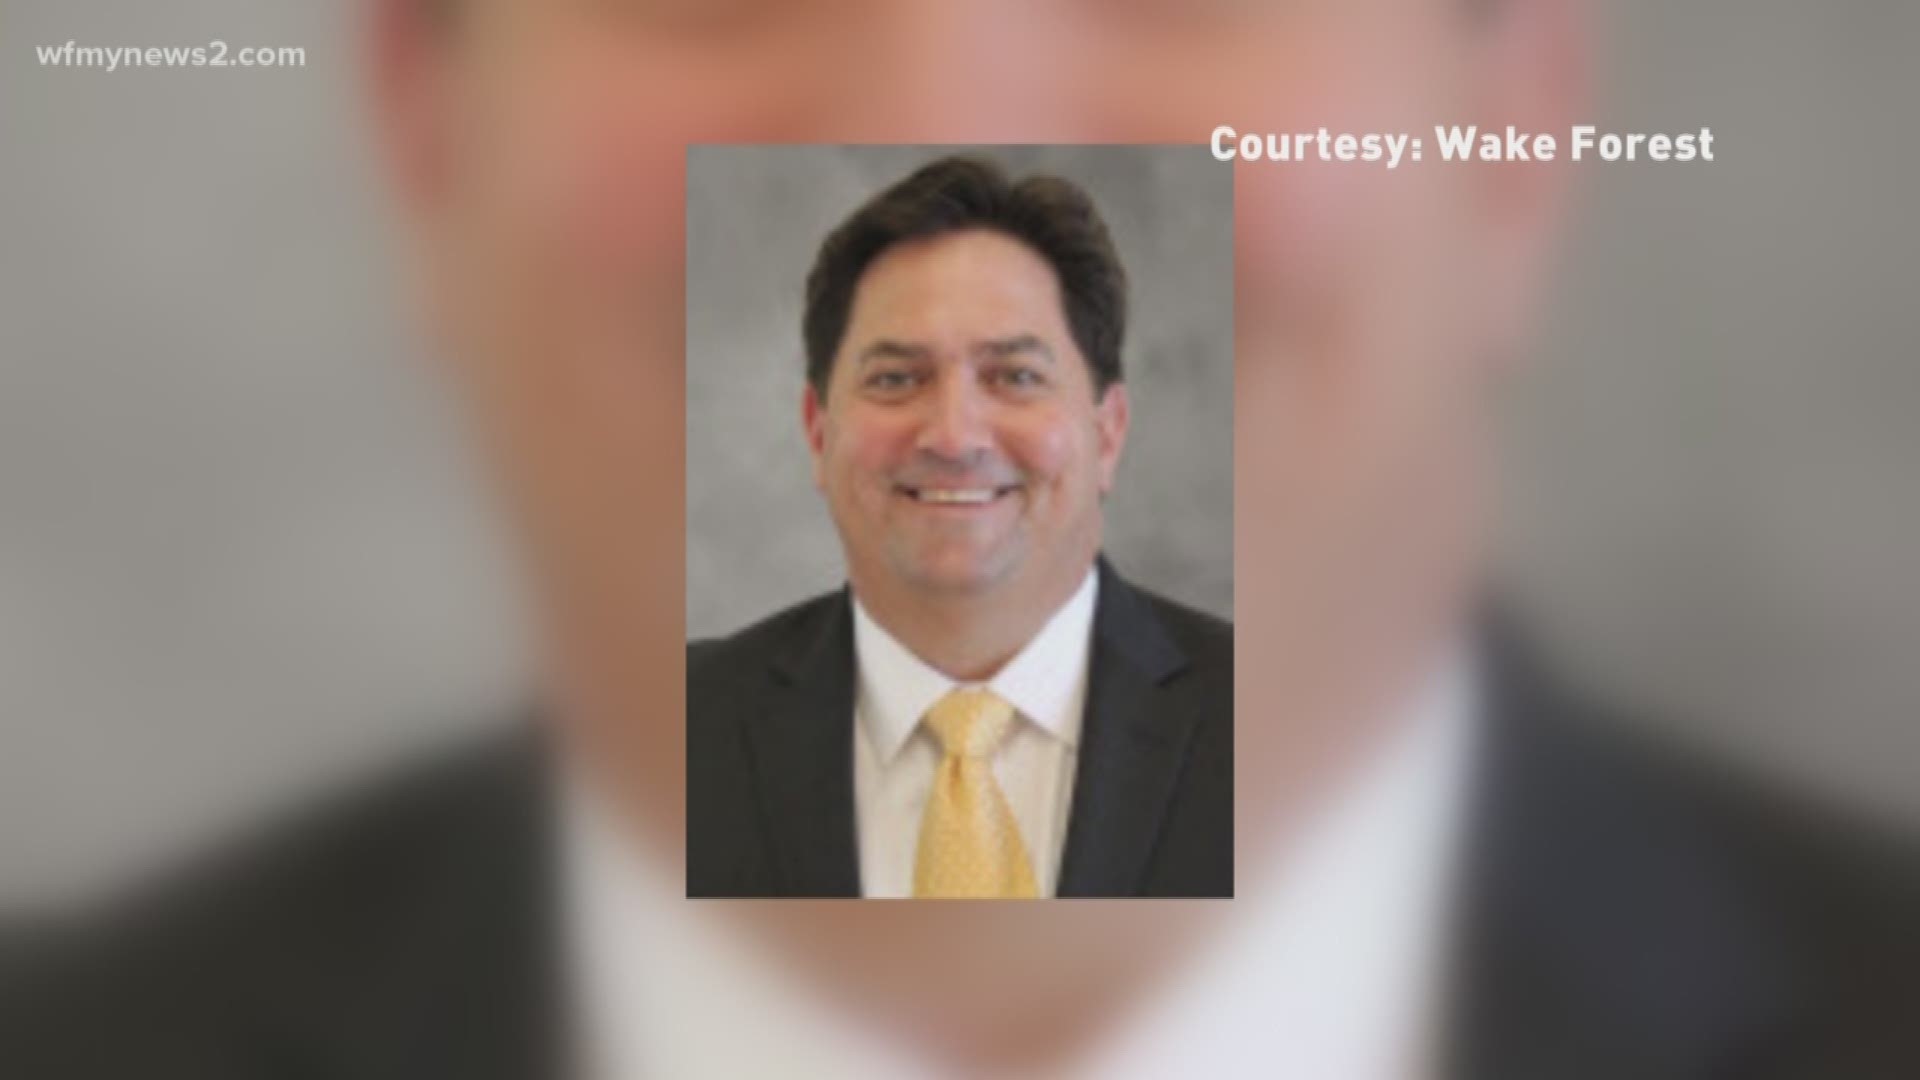 Tuesday morning Wake Forest University confirmed they had suspended head volleyball coach Bill Ferguson following the indictments.